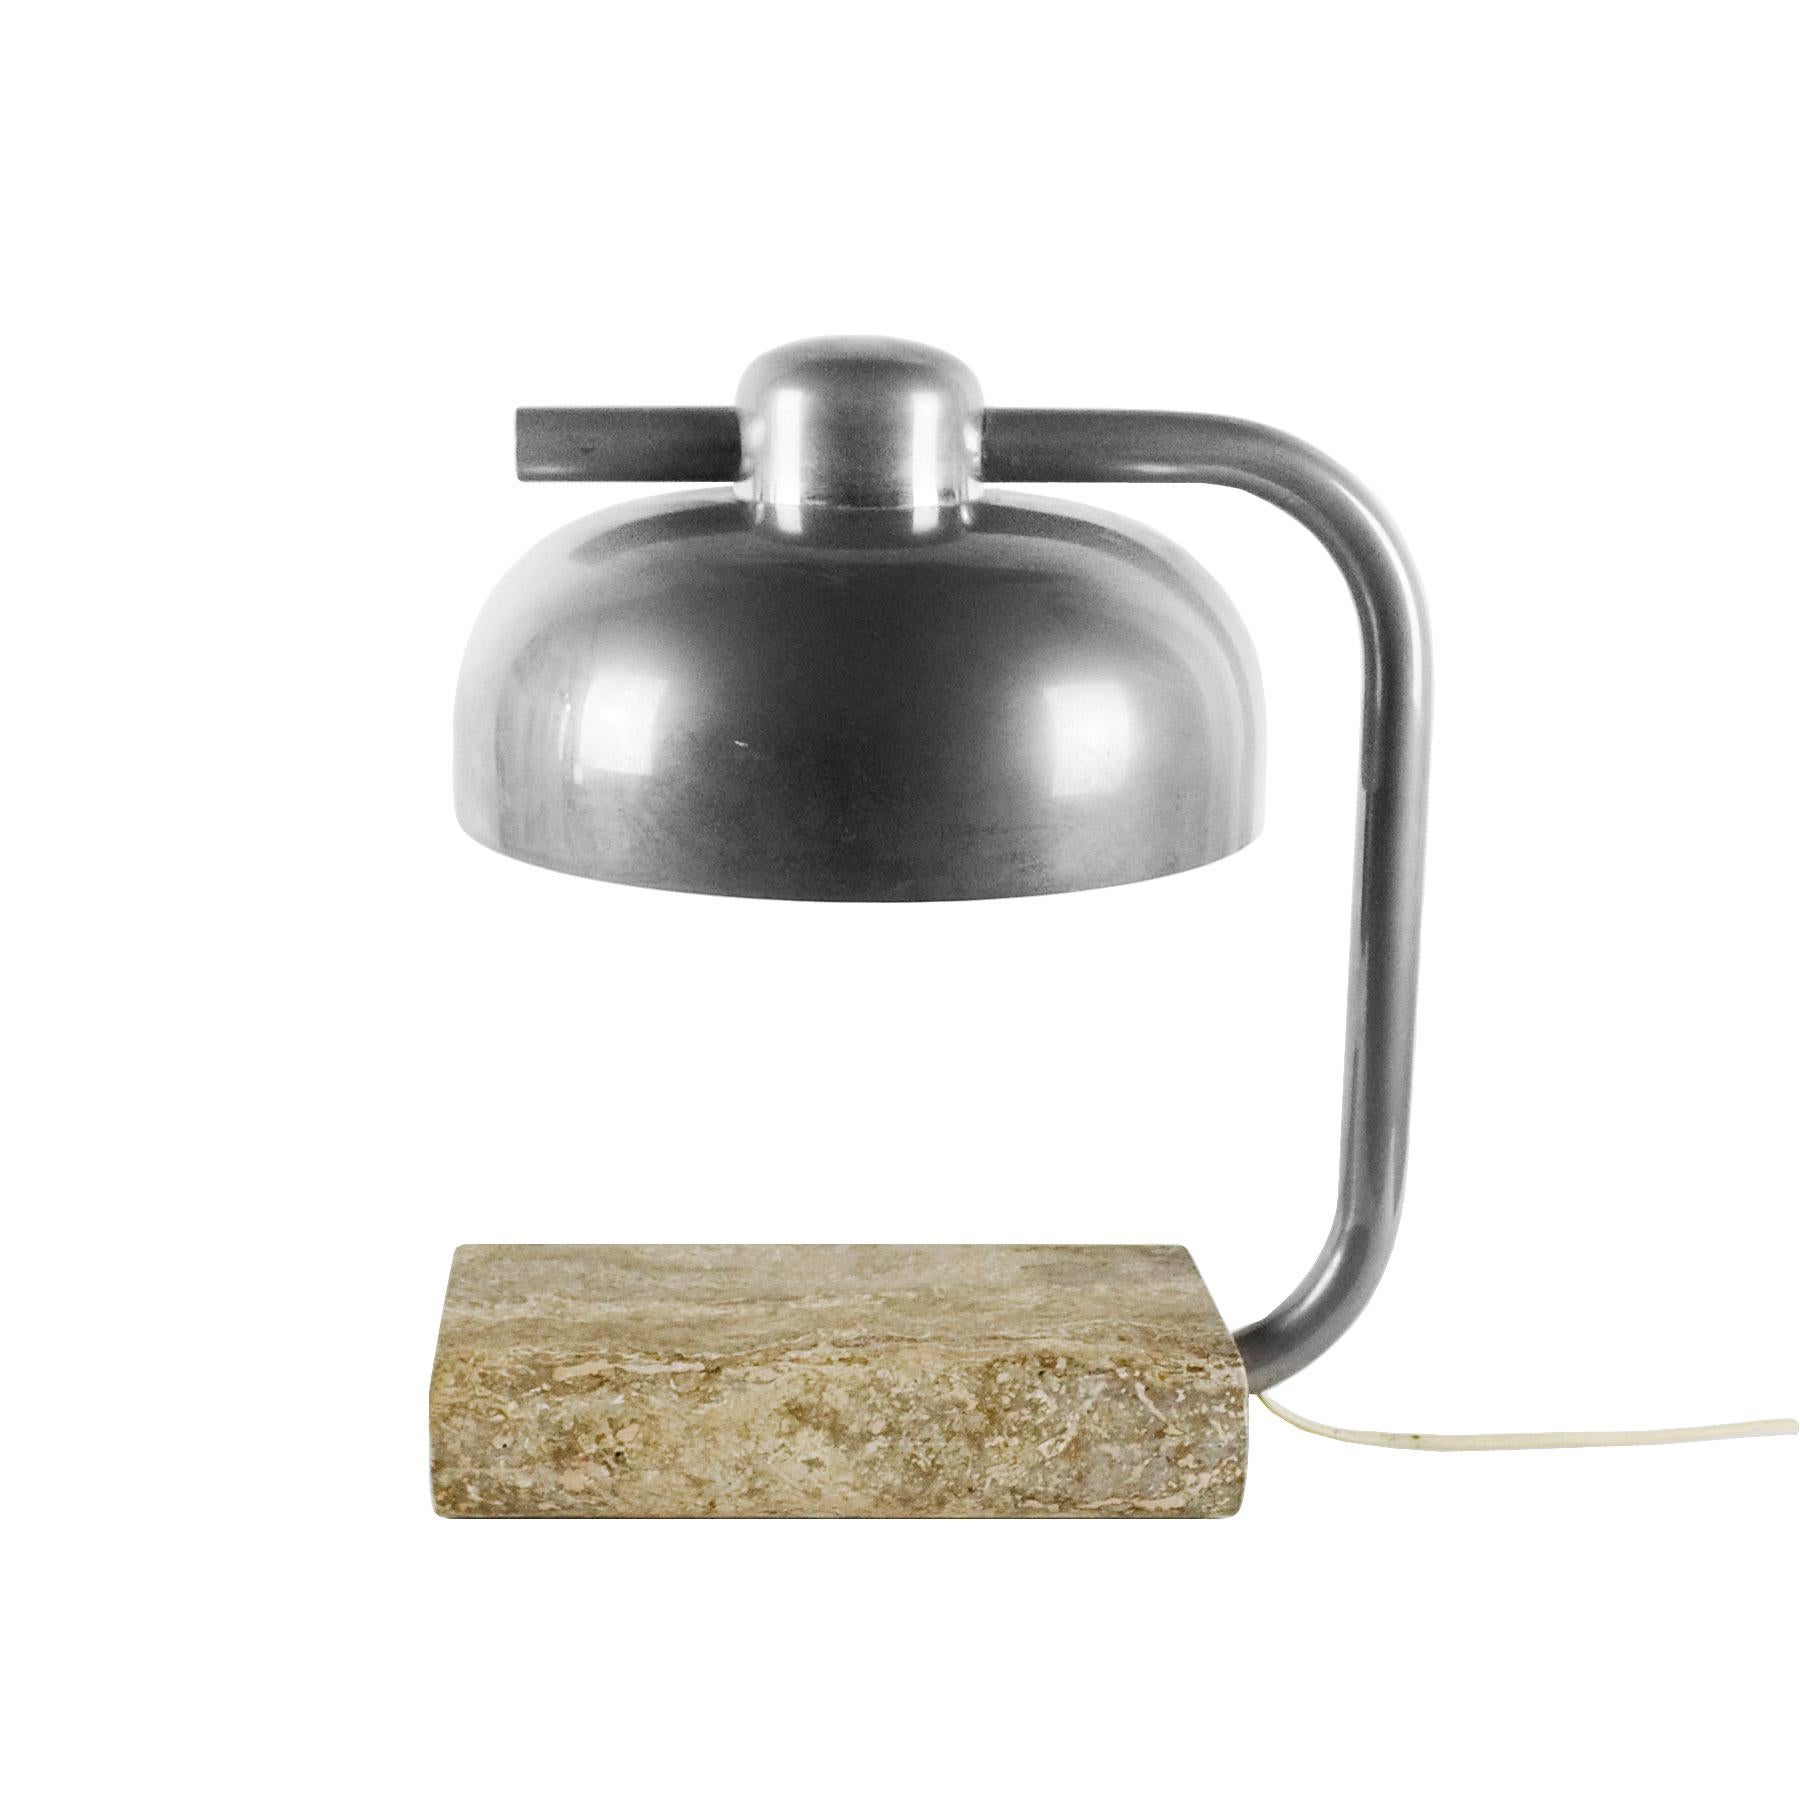 Plated 1970s Table or Desk Lamp by Paolo Salvi, Travertine Marble, Metal, Italy